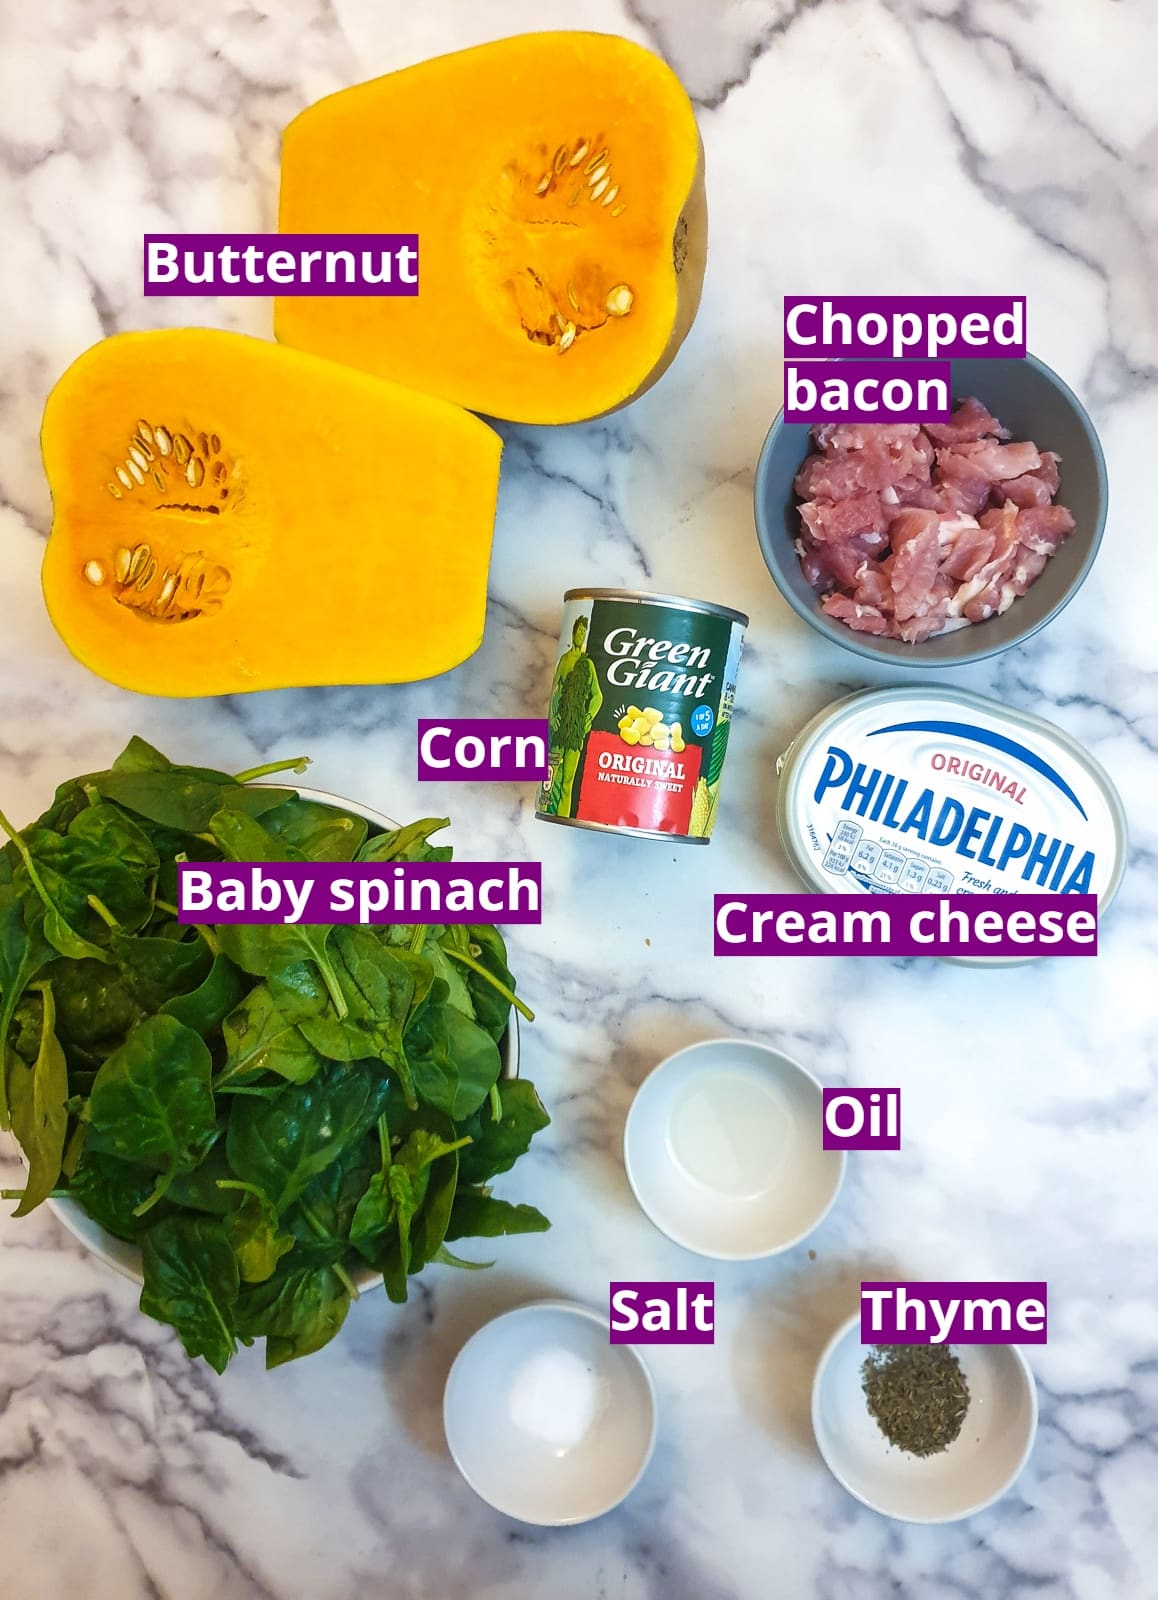 Ingredients for roasted stuffed butternuts.